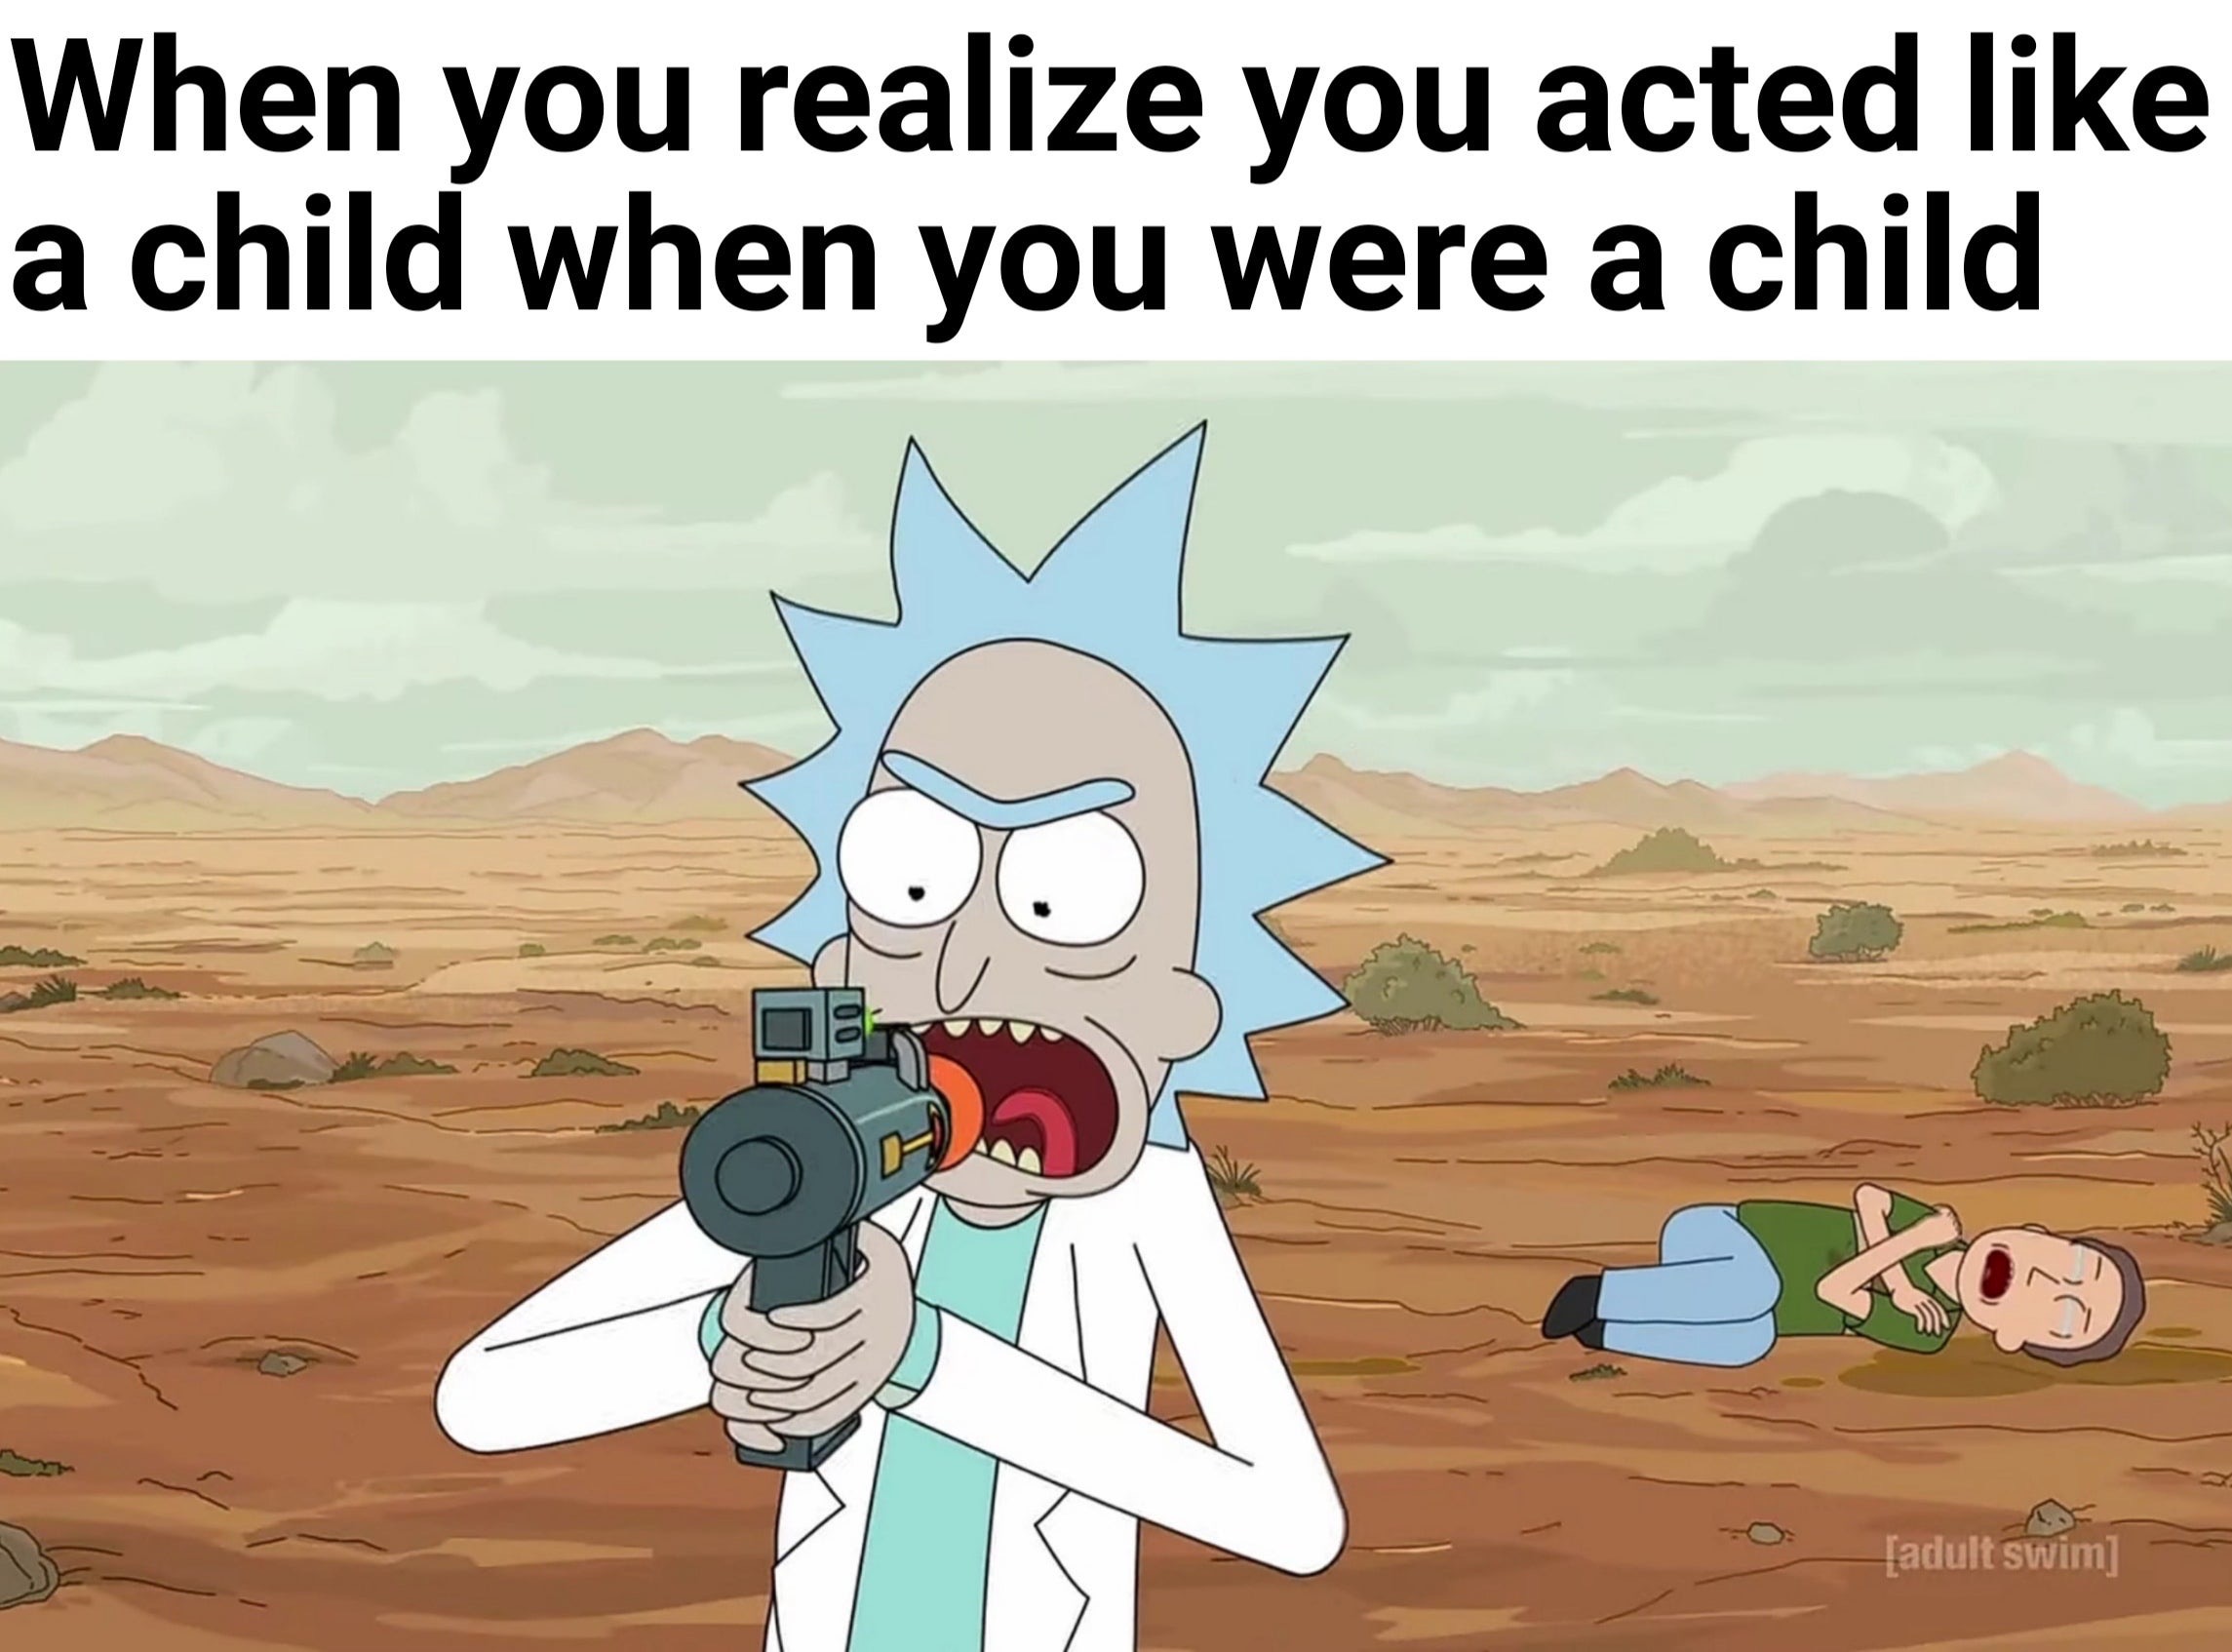 funny memes - rick and morty season 4 episode 4 cat - When you realize you acted a child when you were a child adult swim